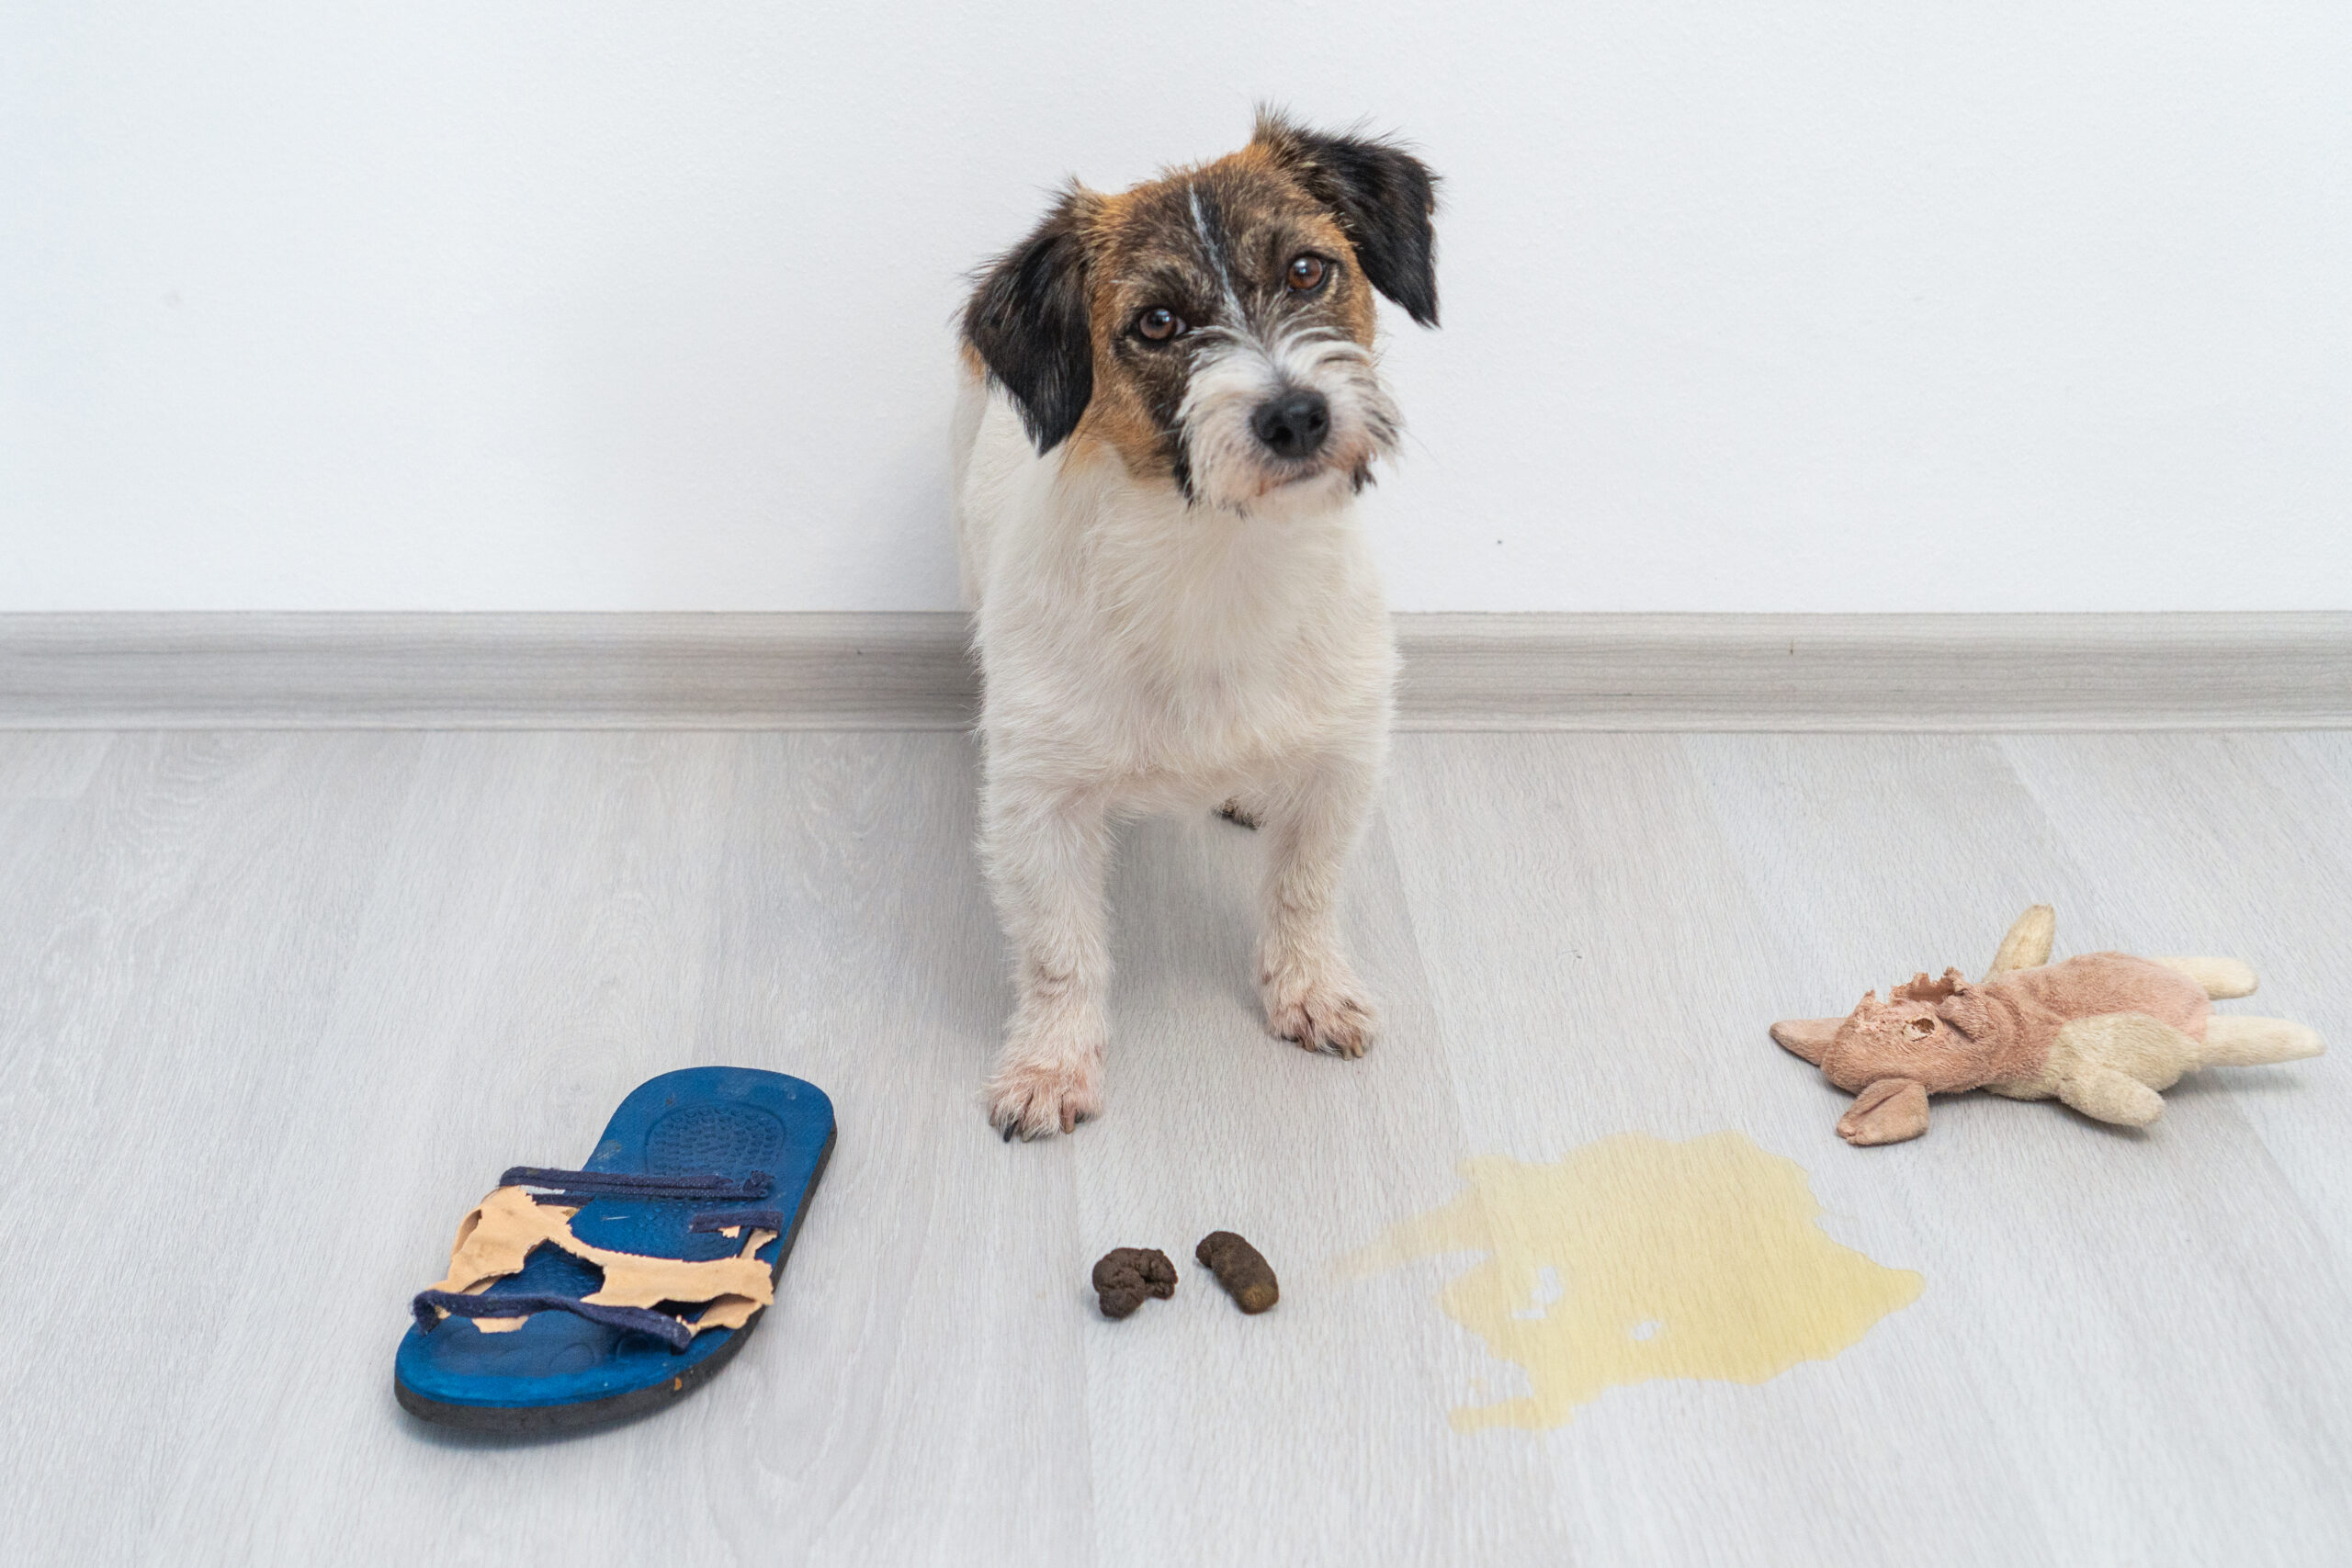 Jack Russell Terrier dog made a home mess and peed on the floor